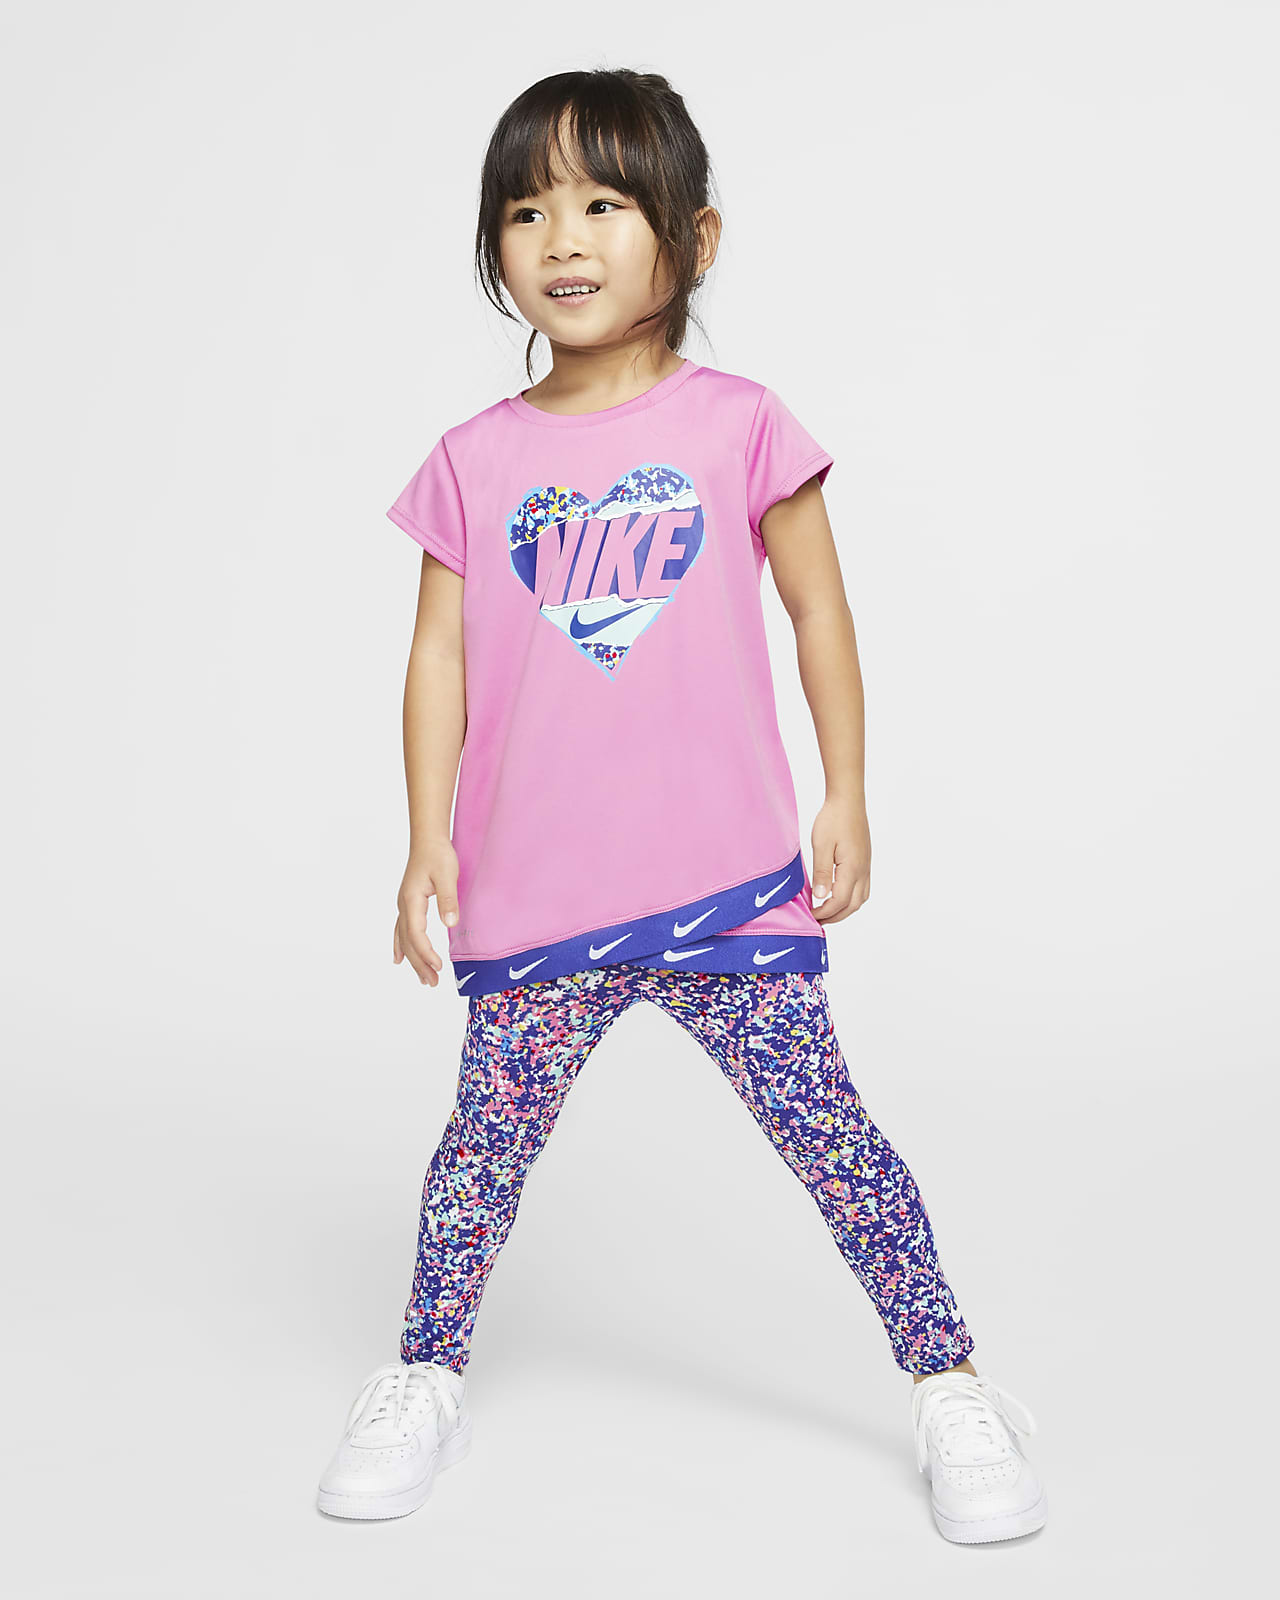 Nike Dri-FIT Toddler Tunic Top and 